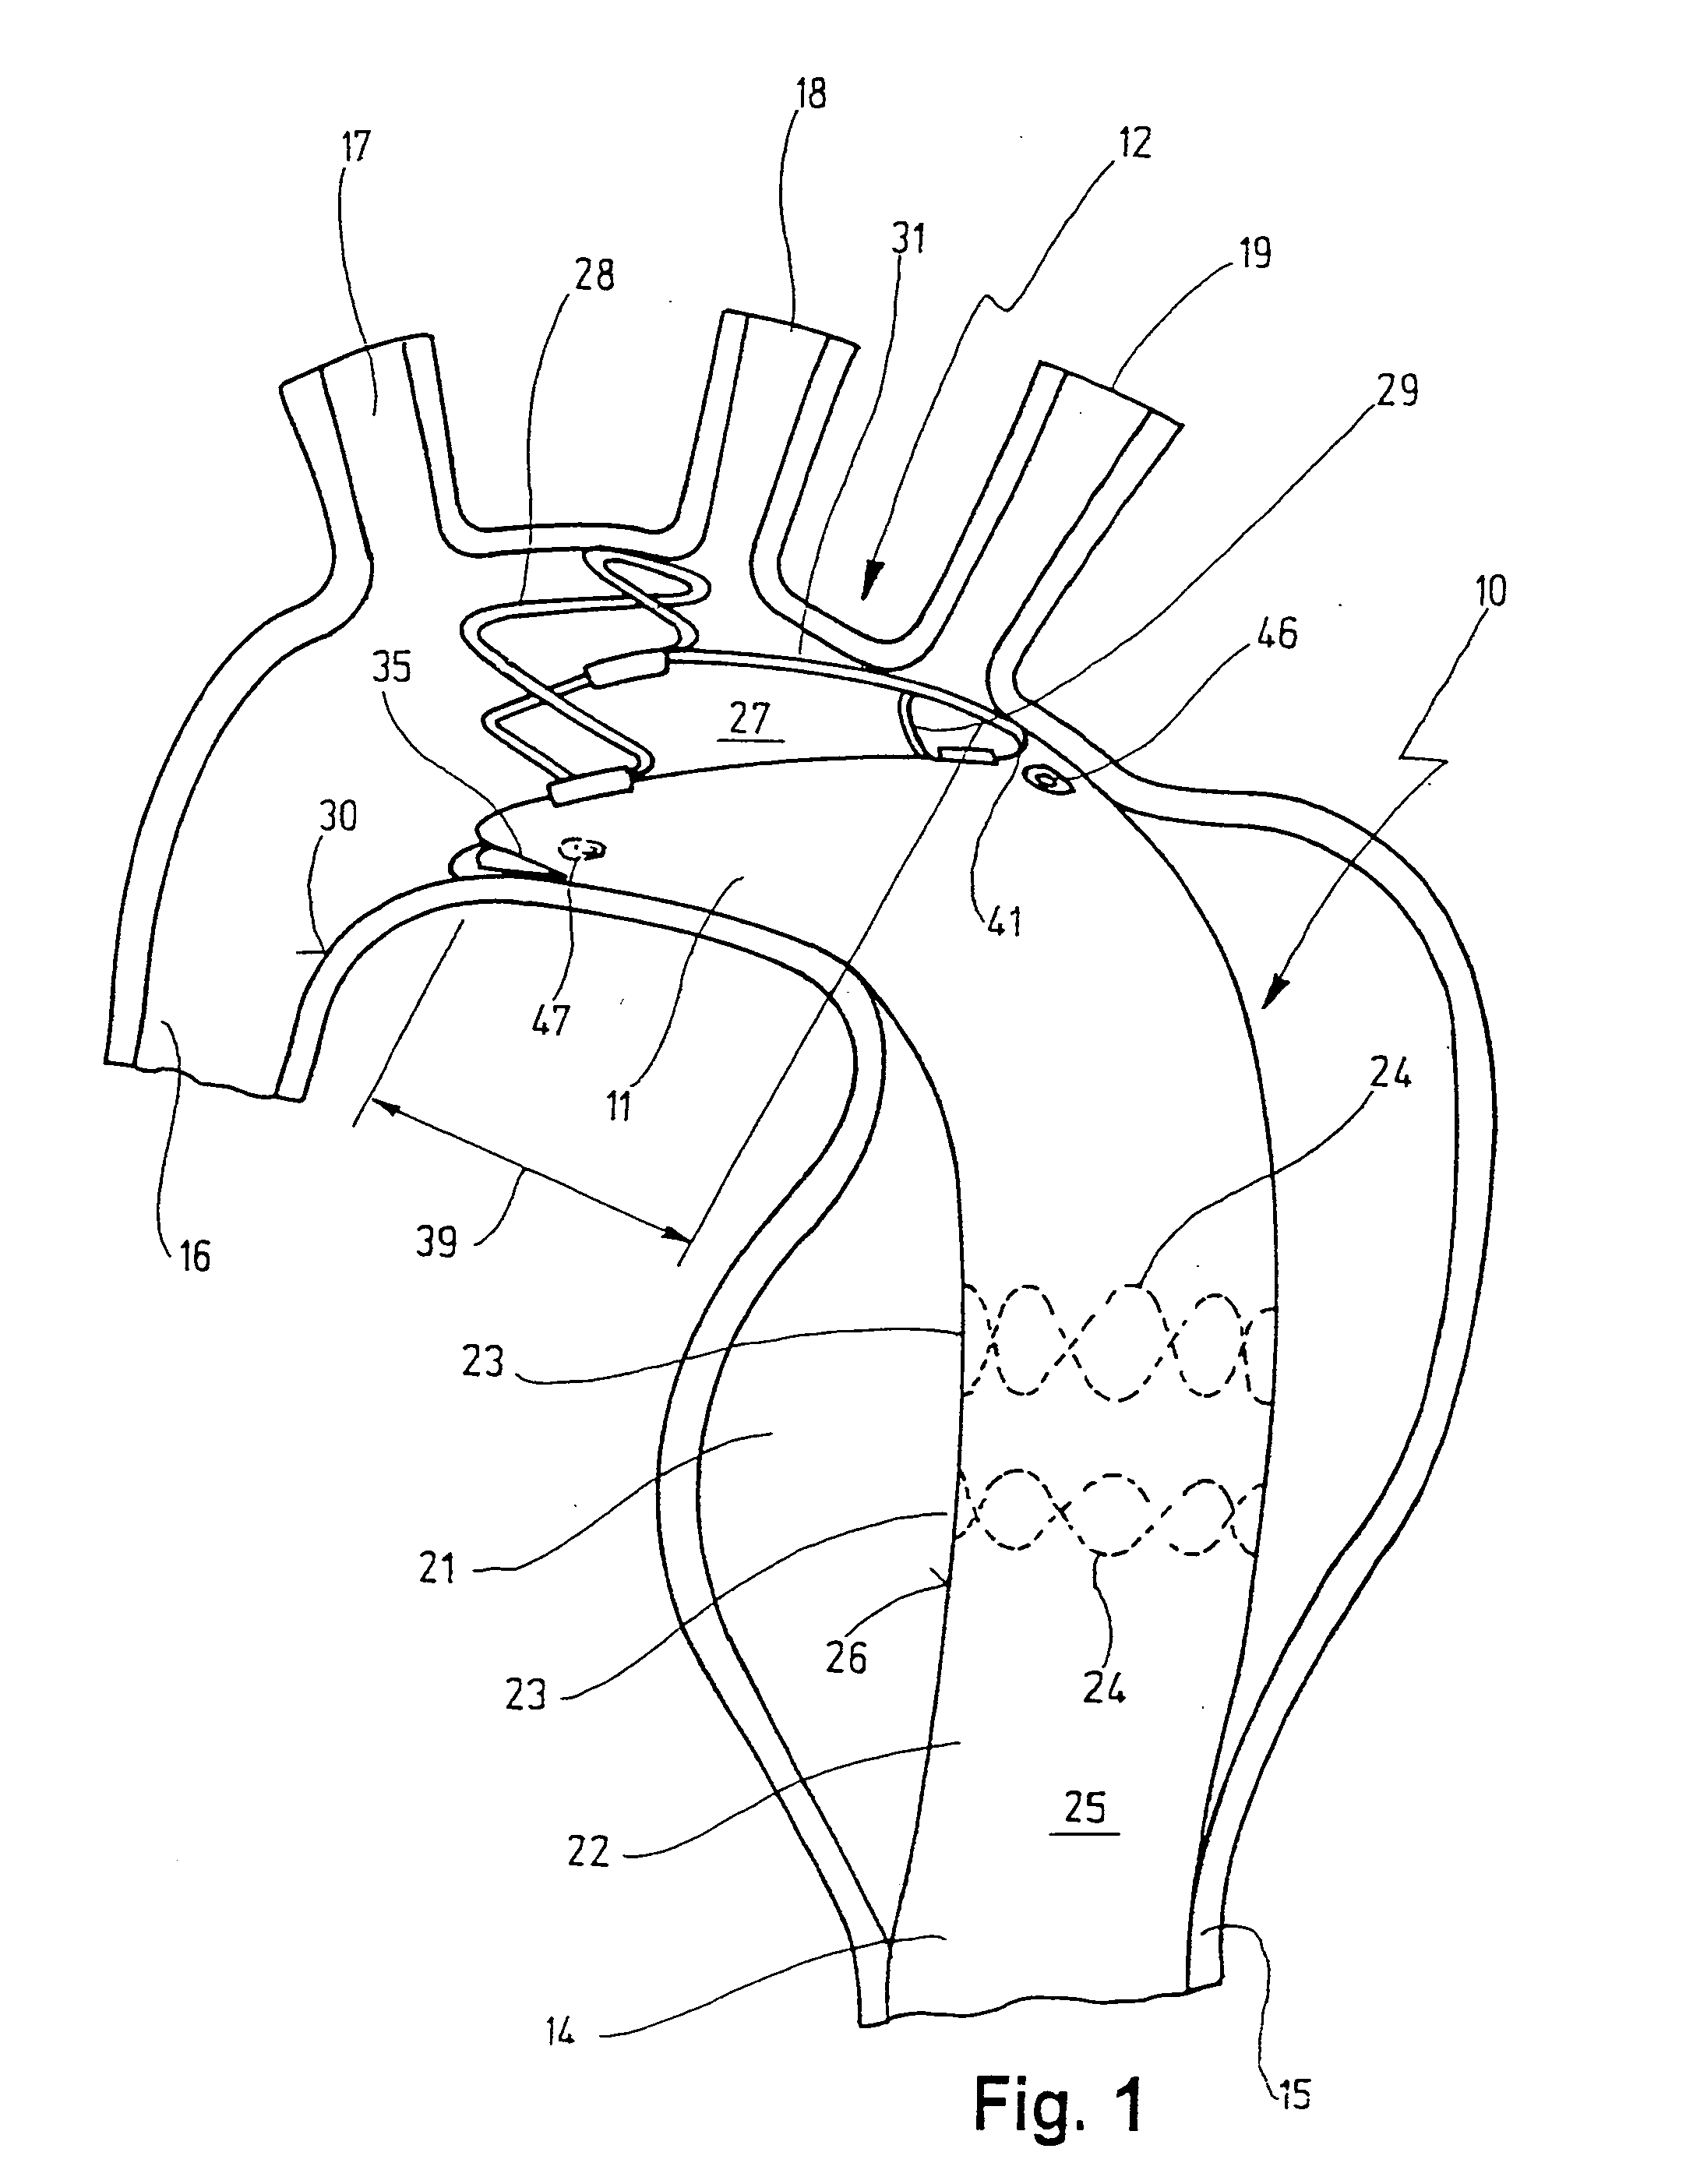 Stent for implantation in a blood vessel, especially in the region of the aortic arch